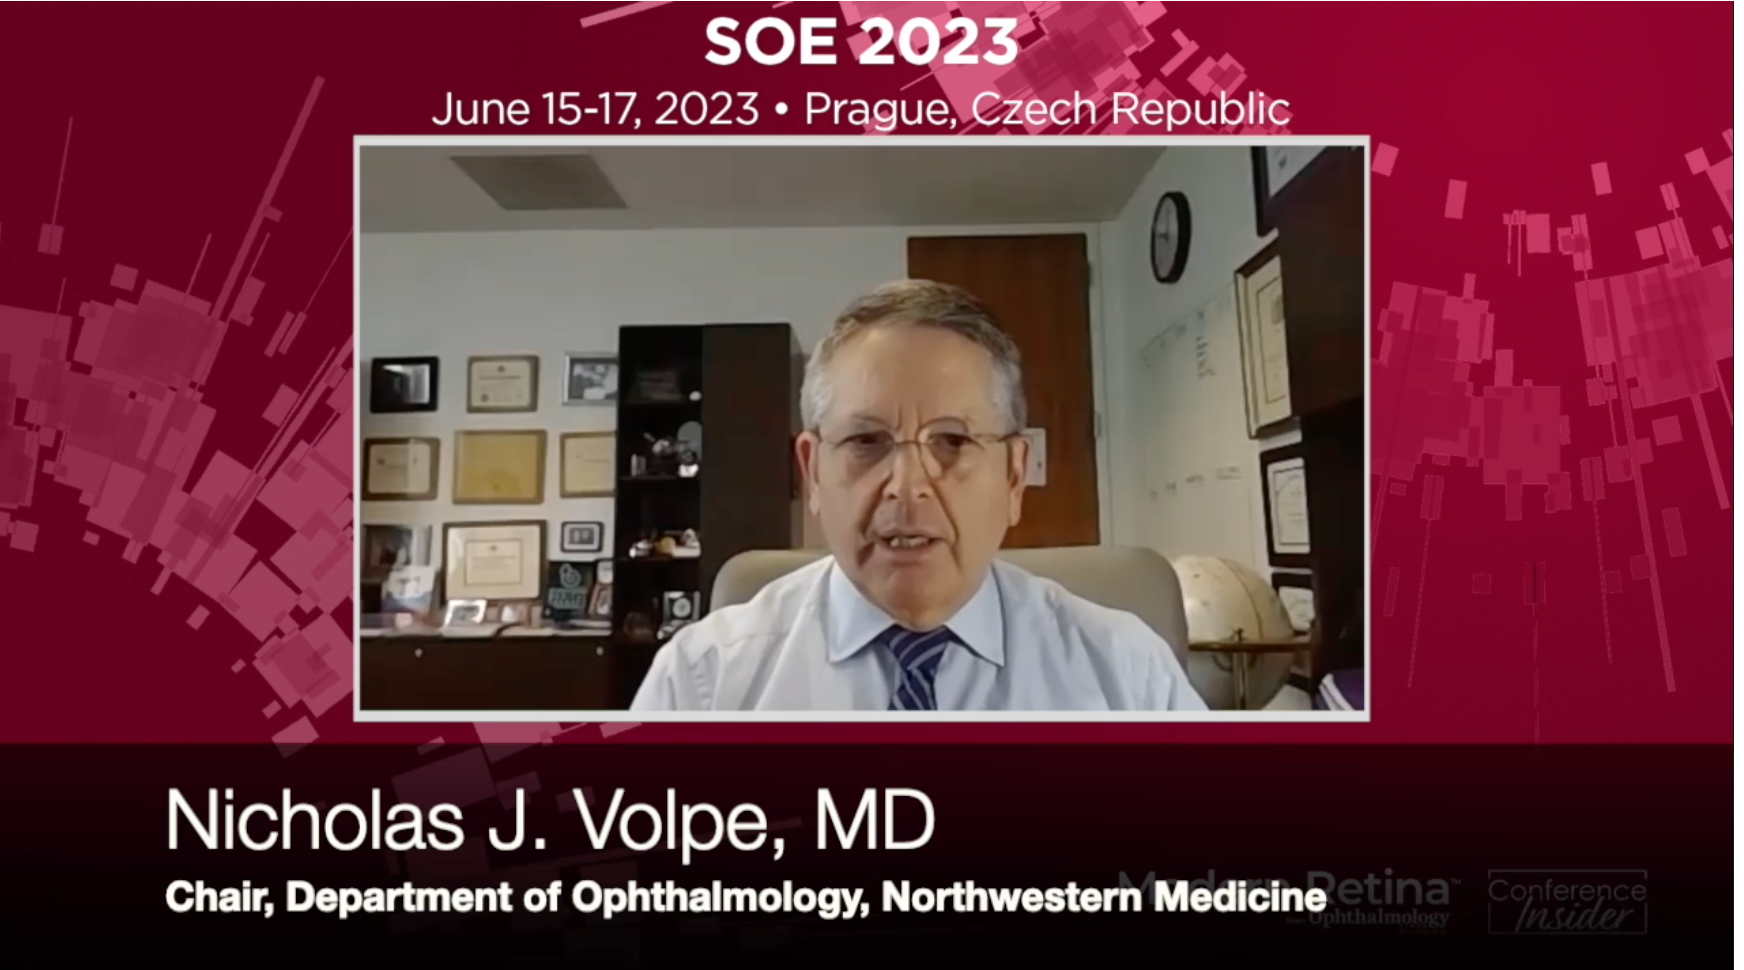 Via video chat, Nicholas Volpe, MD shares insights from his talk titled "Optic Neuropathy Versus Maculopathy"